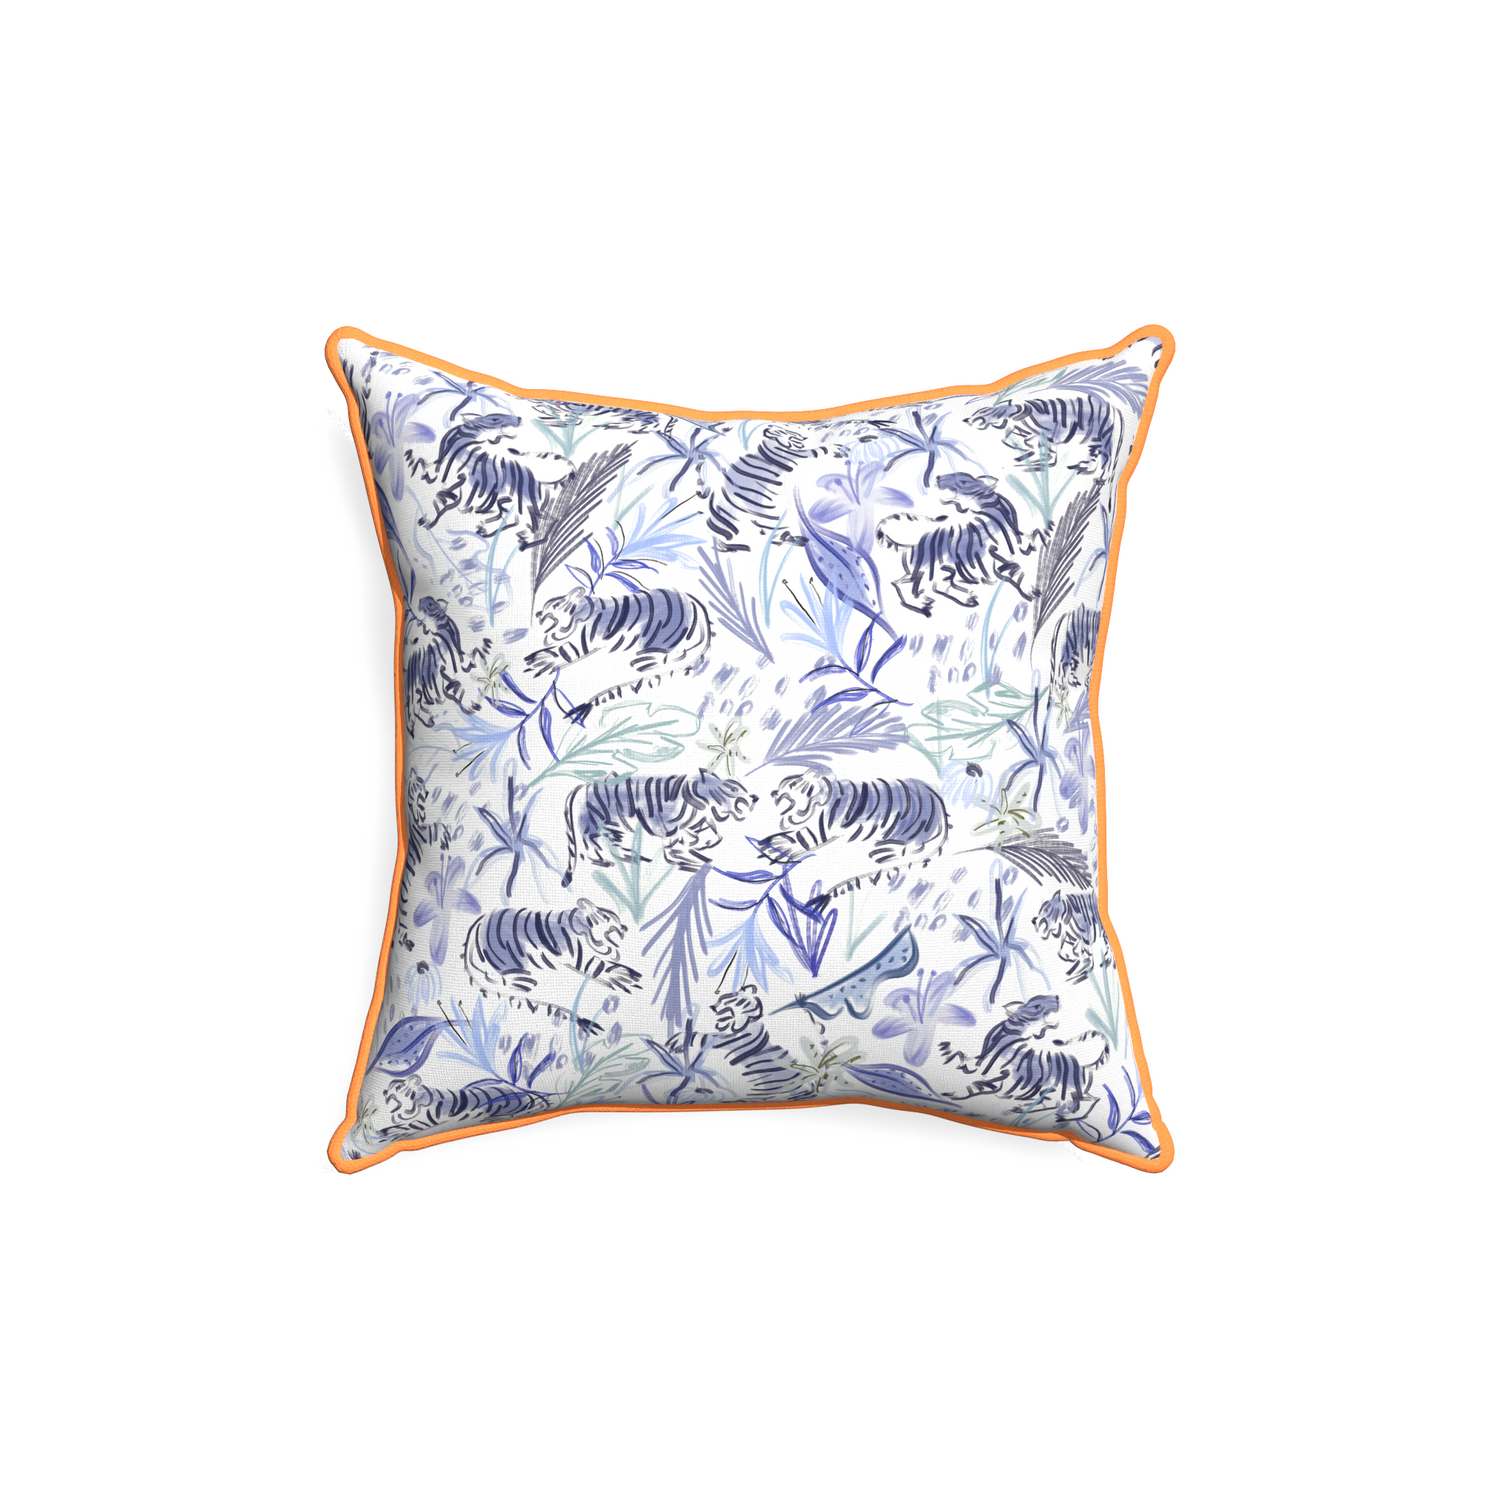 18-square frida blue custom blue with intricate tiger designpillow with clementine piping on white background